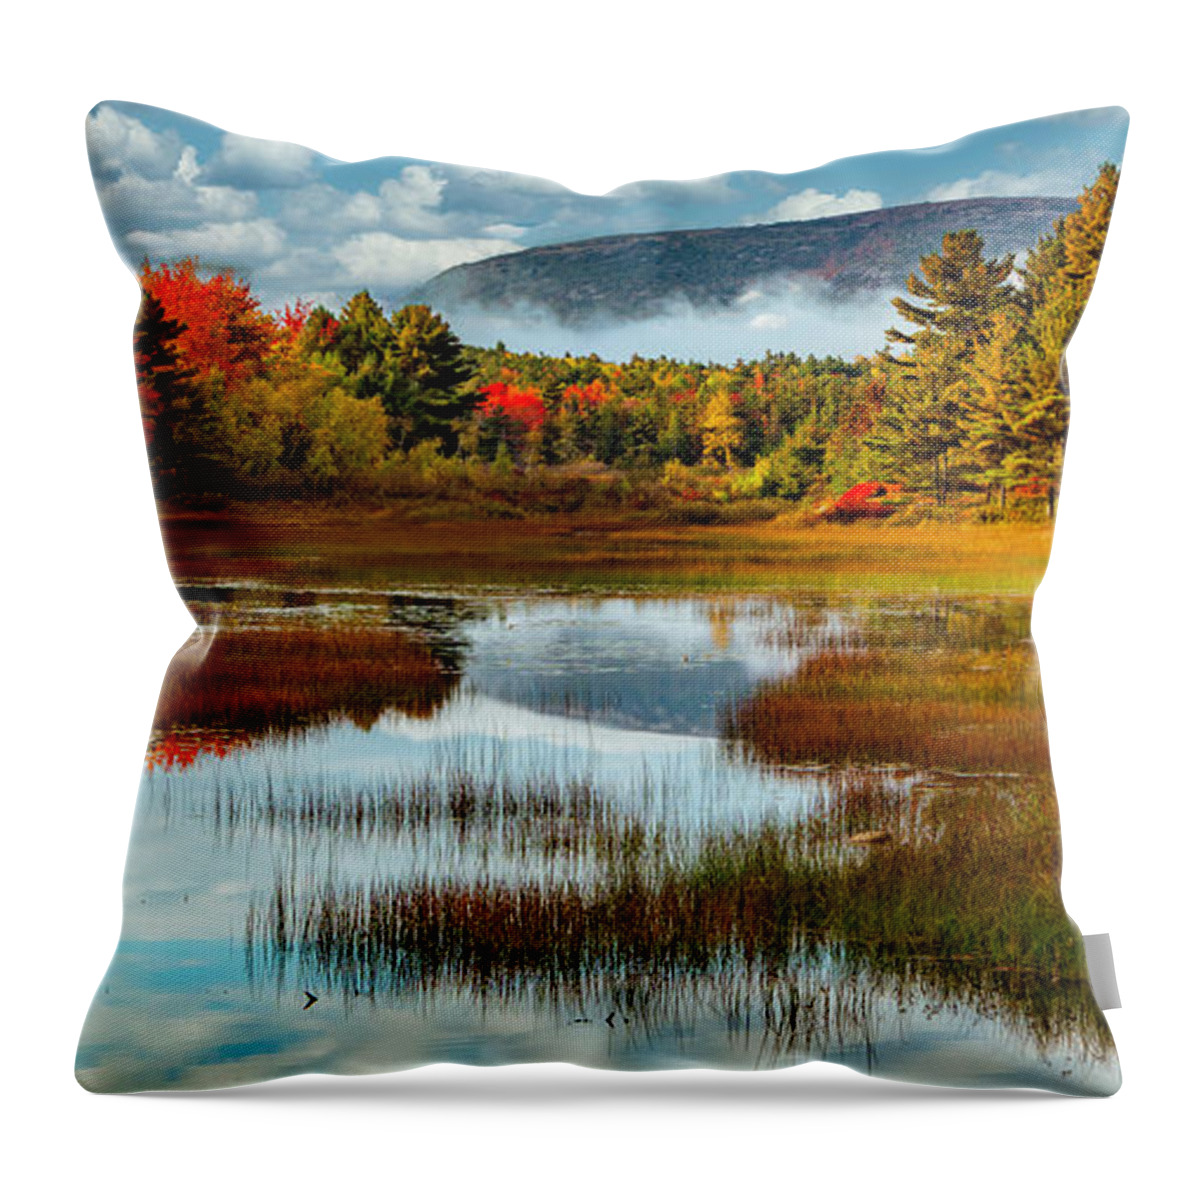  Throw Pillow featuring the photograph Acadia Meadow by Gary Johnson